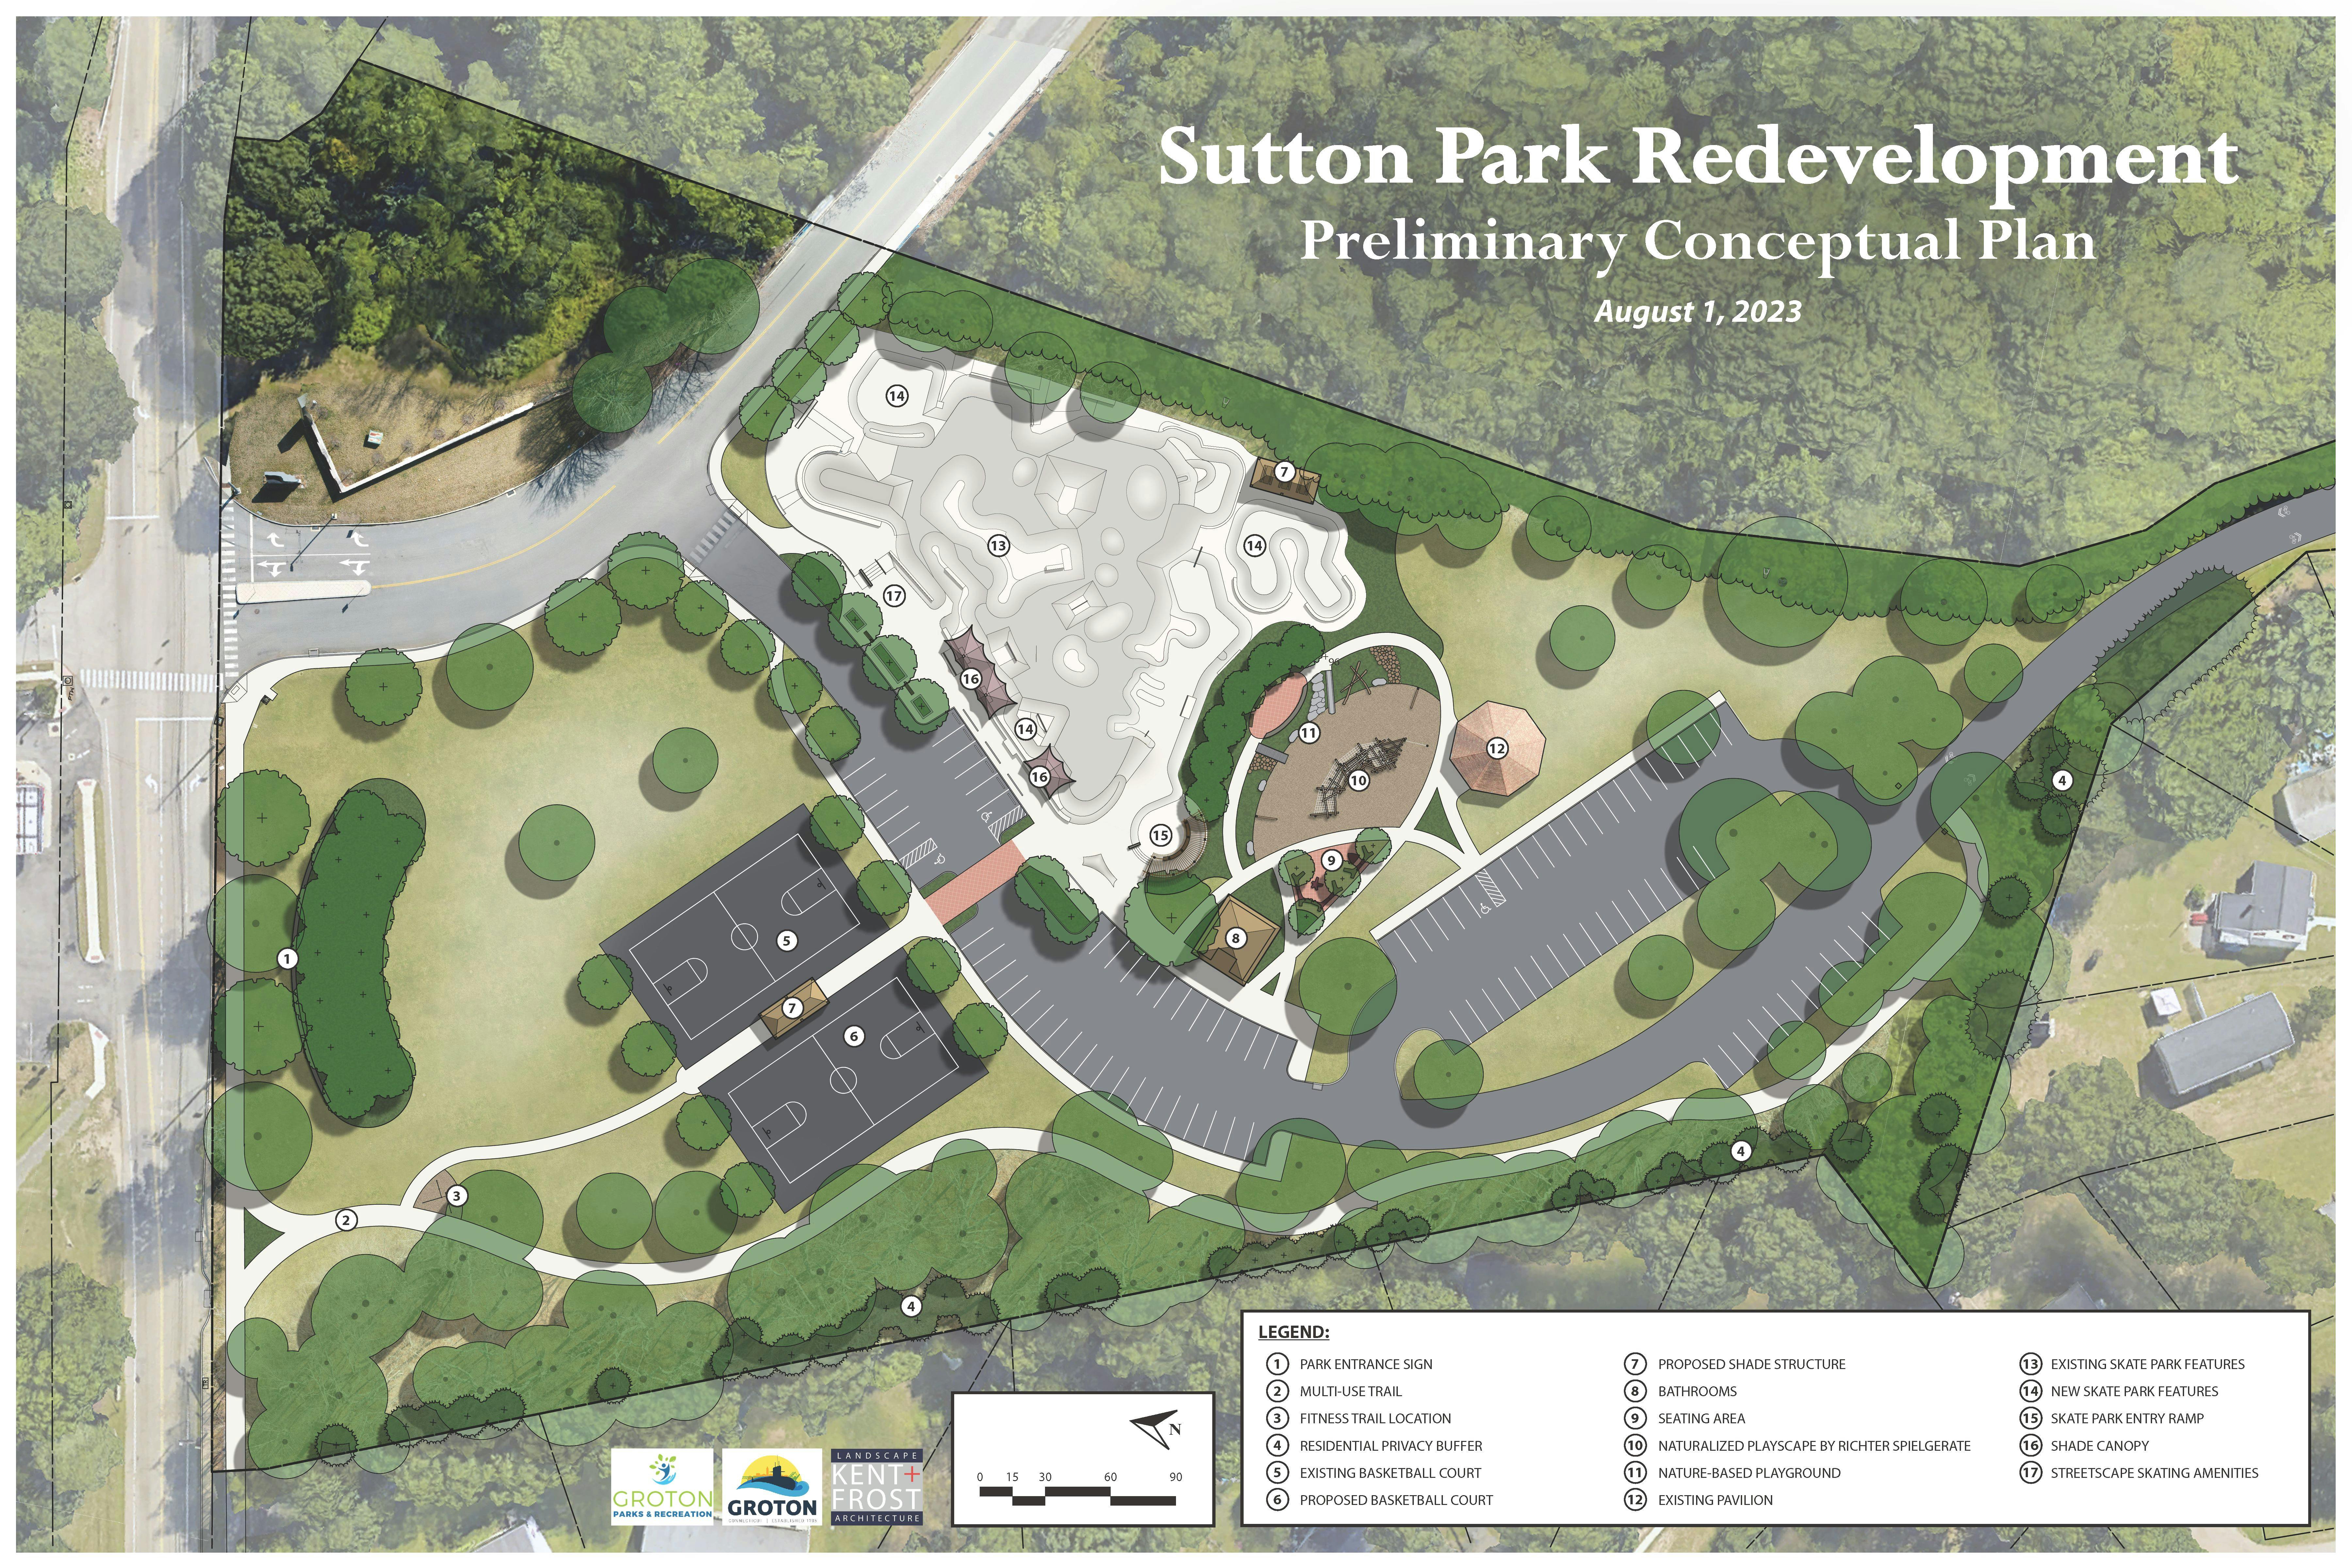 Image shows proposed changes to Sutton Park. 